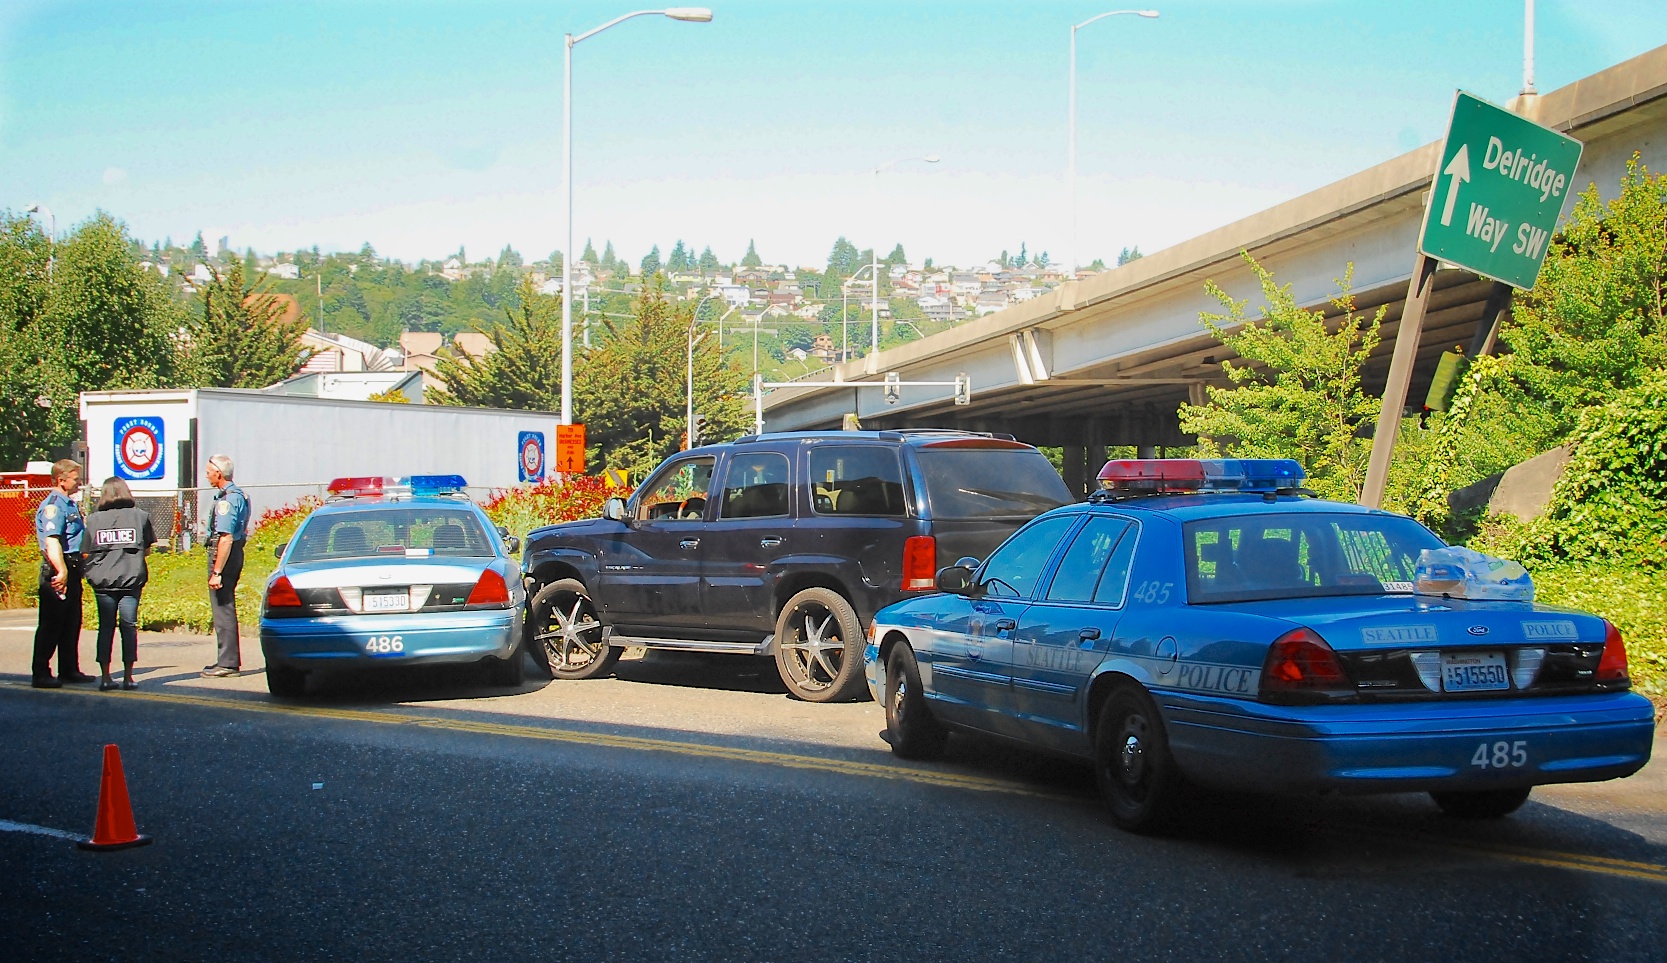 Update Suspect Rams Four Police Cars And Was Chased On Delridge Westside Seattle 4906